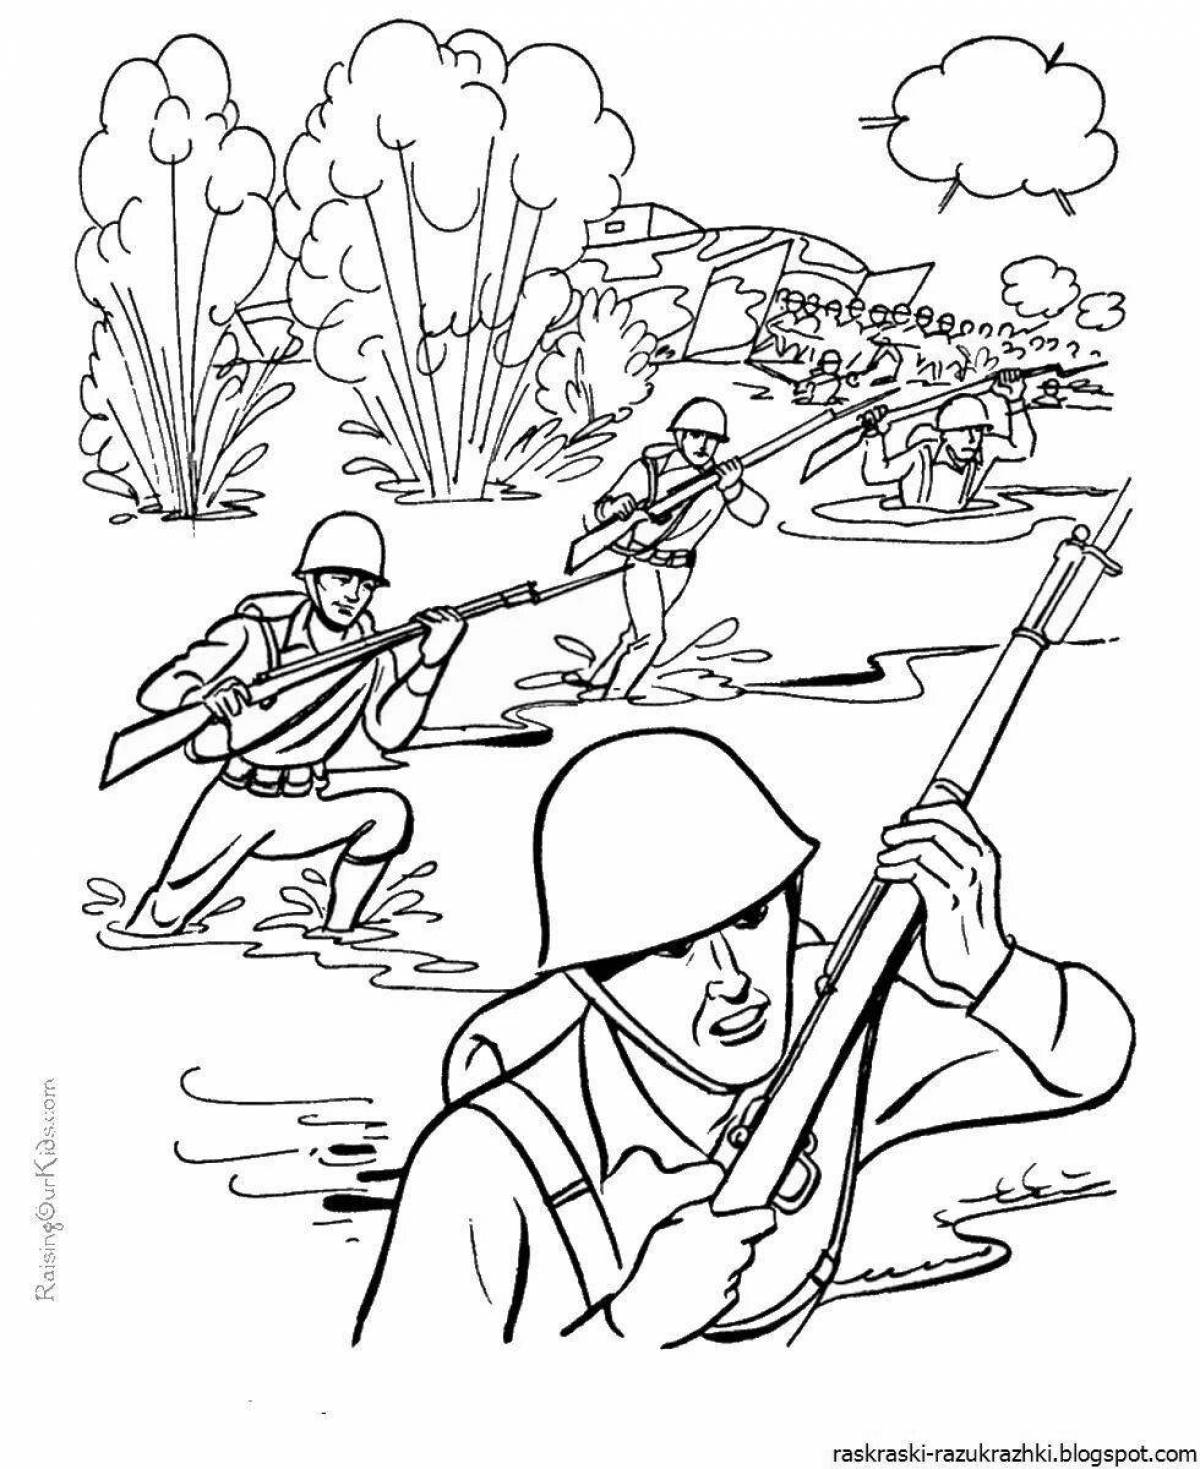 Great military coloring book for 6-7 year olds